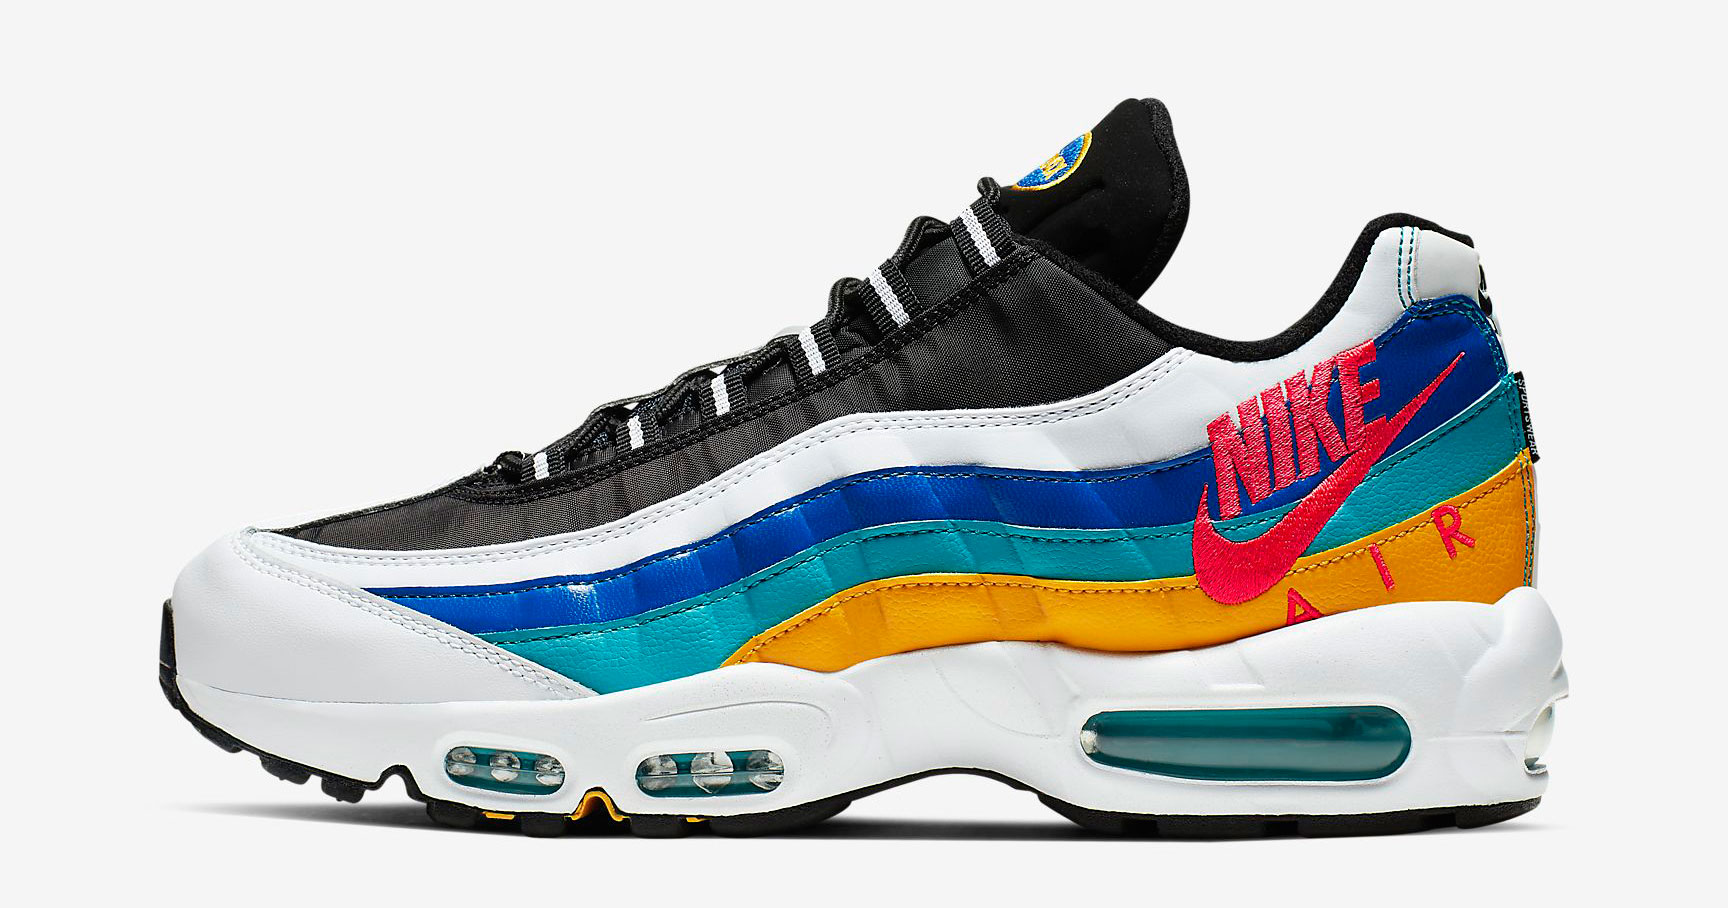 nike-air-max-95-game-changer-windbreaker-white-gold-teal-red-2